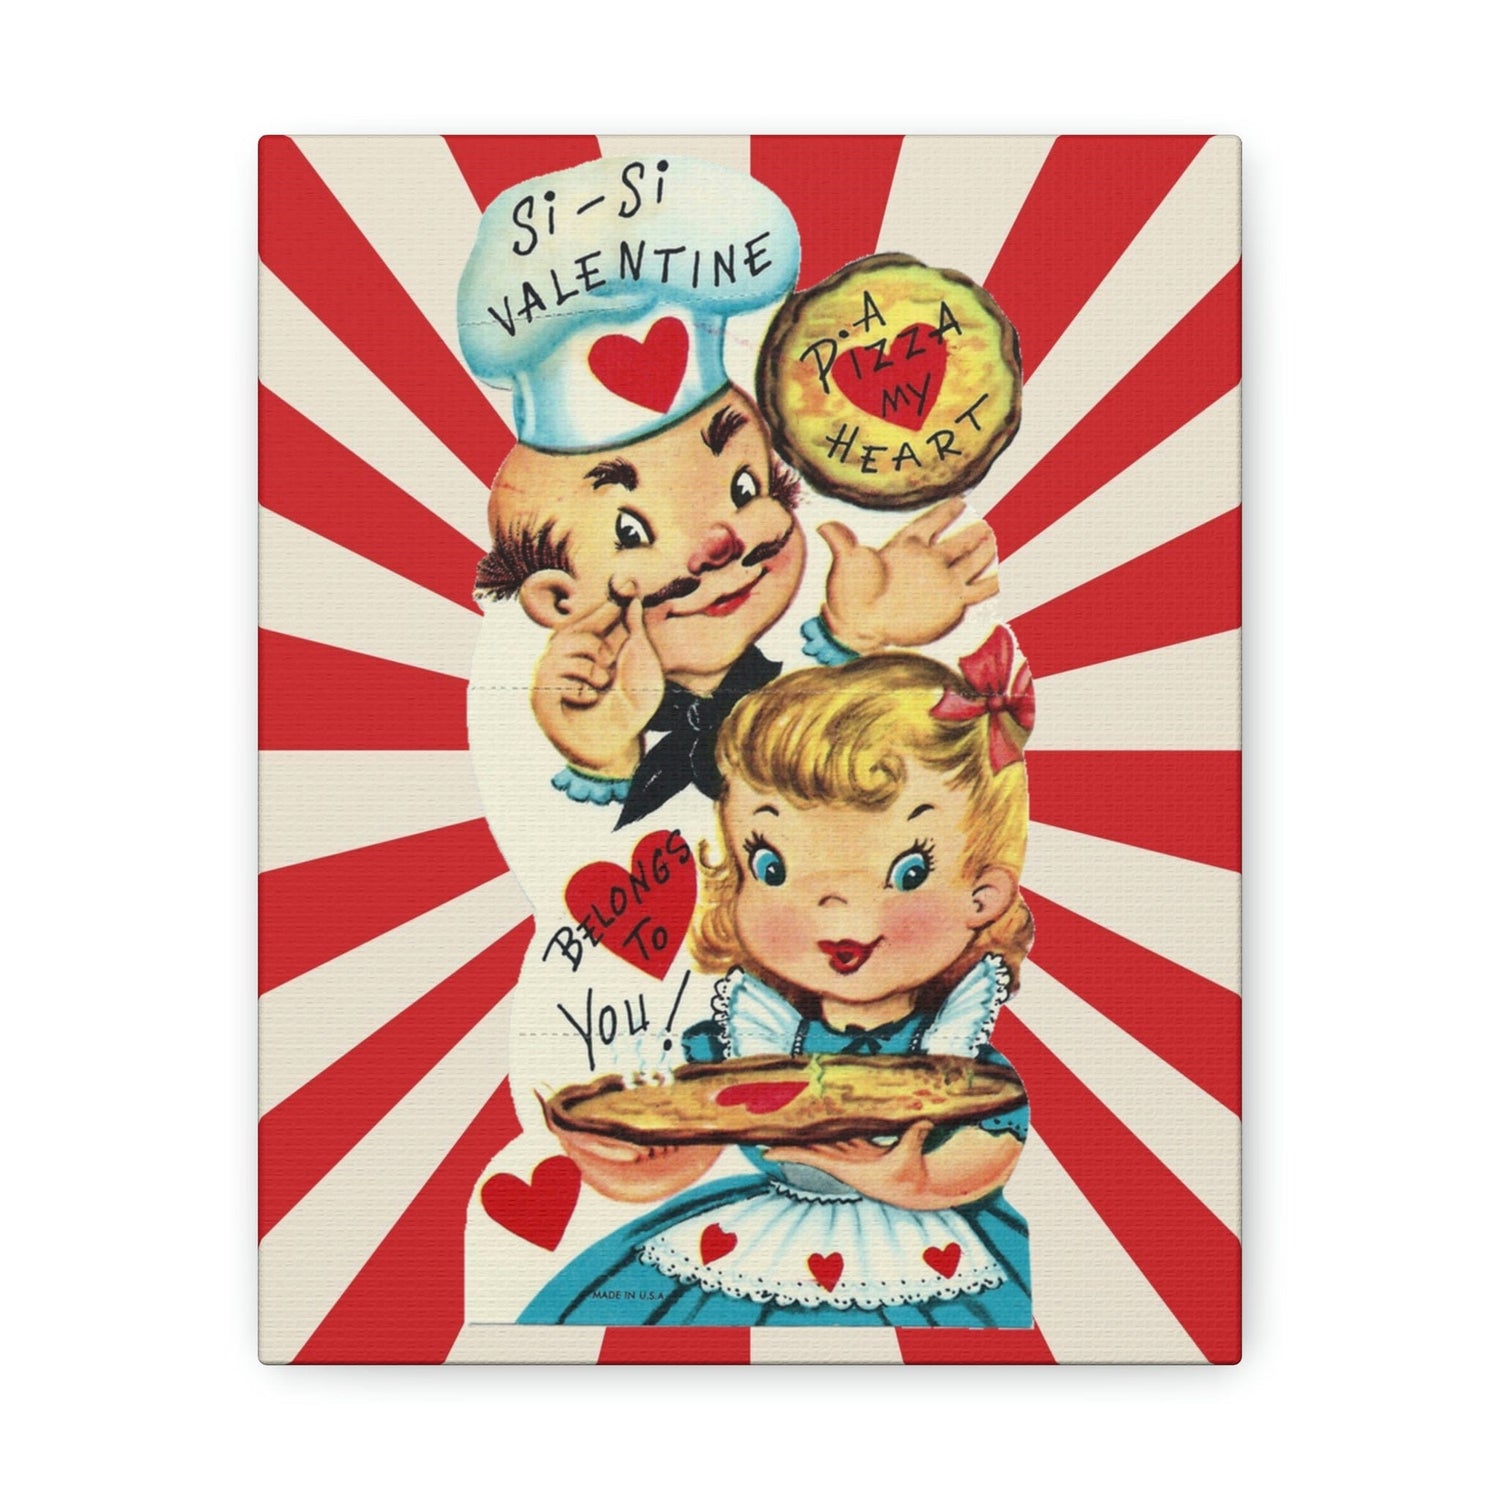 16 Vintage Valentines Day Cards - Funny Antique Valentines - Country Living